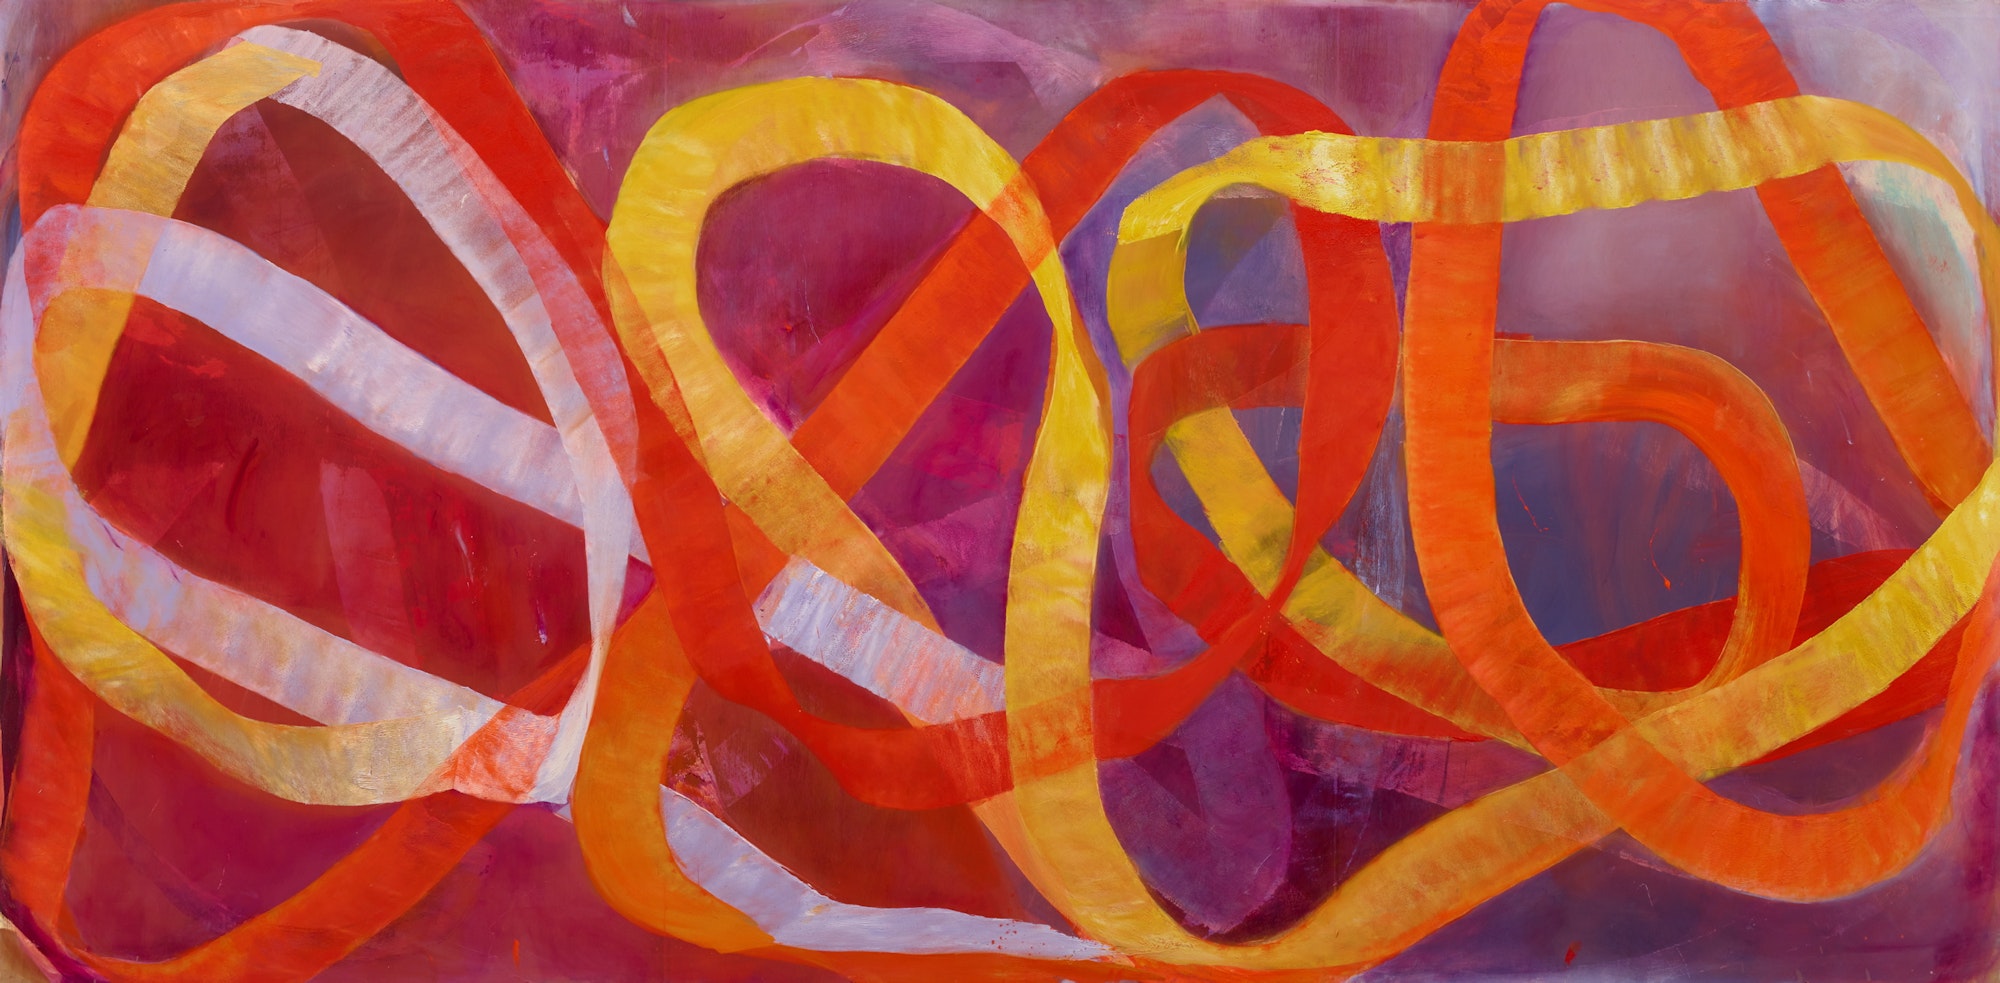 Looping bands of orange, yellow and white on a red and purple background